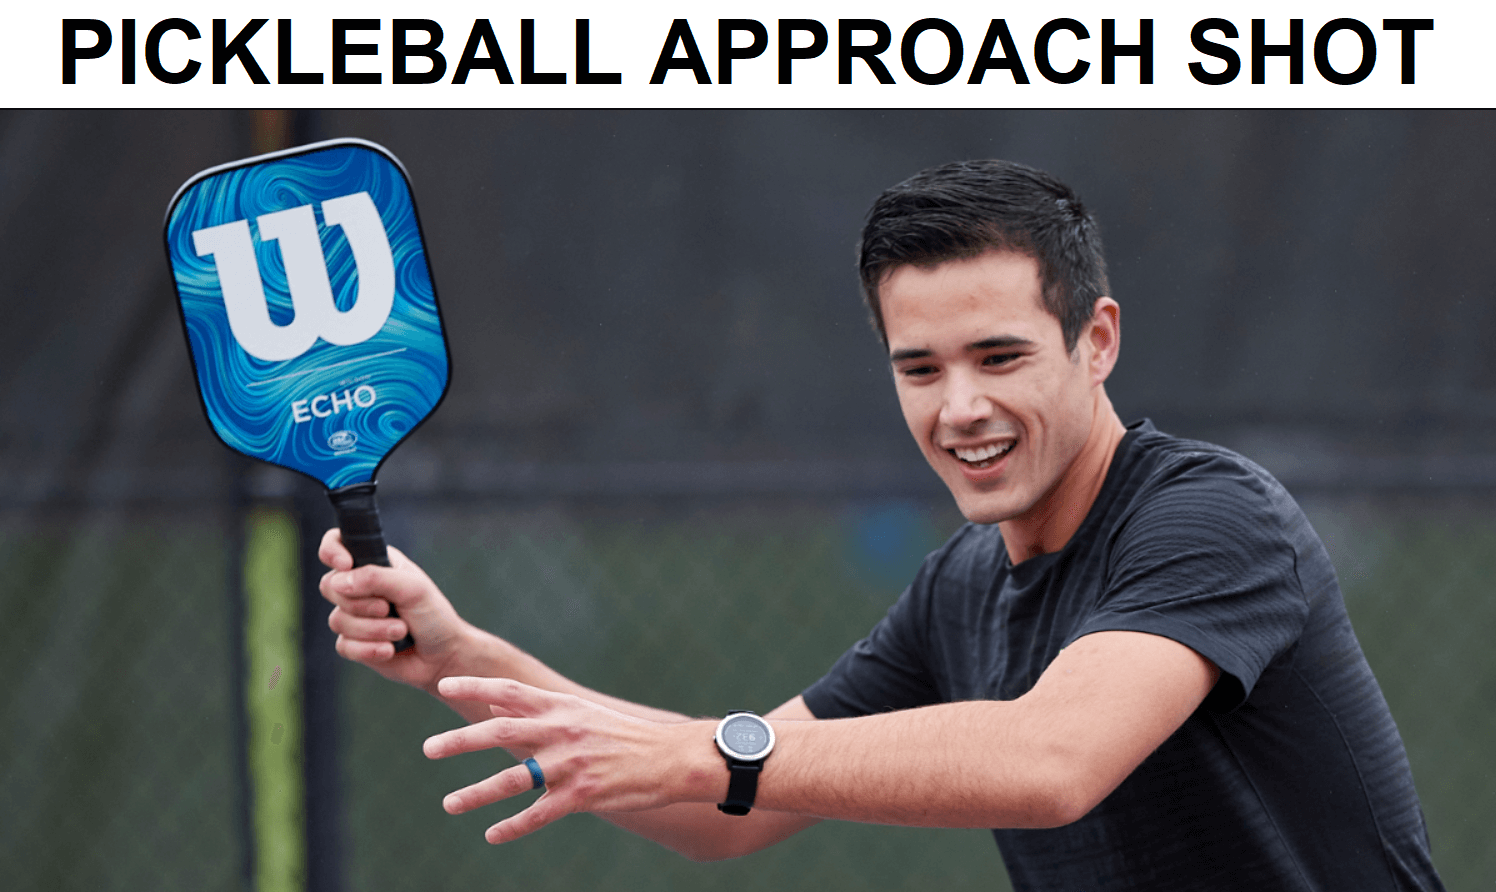 What is an approach shot in the sport of pickleball?